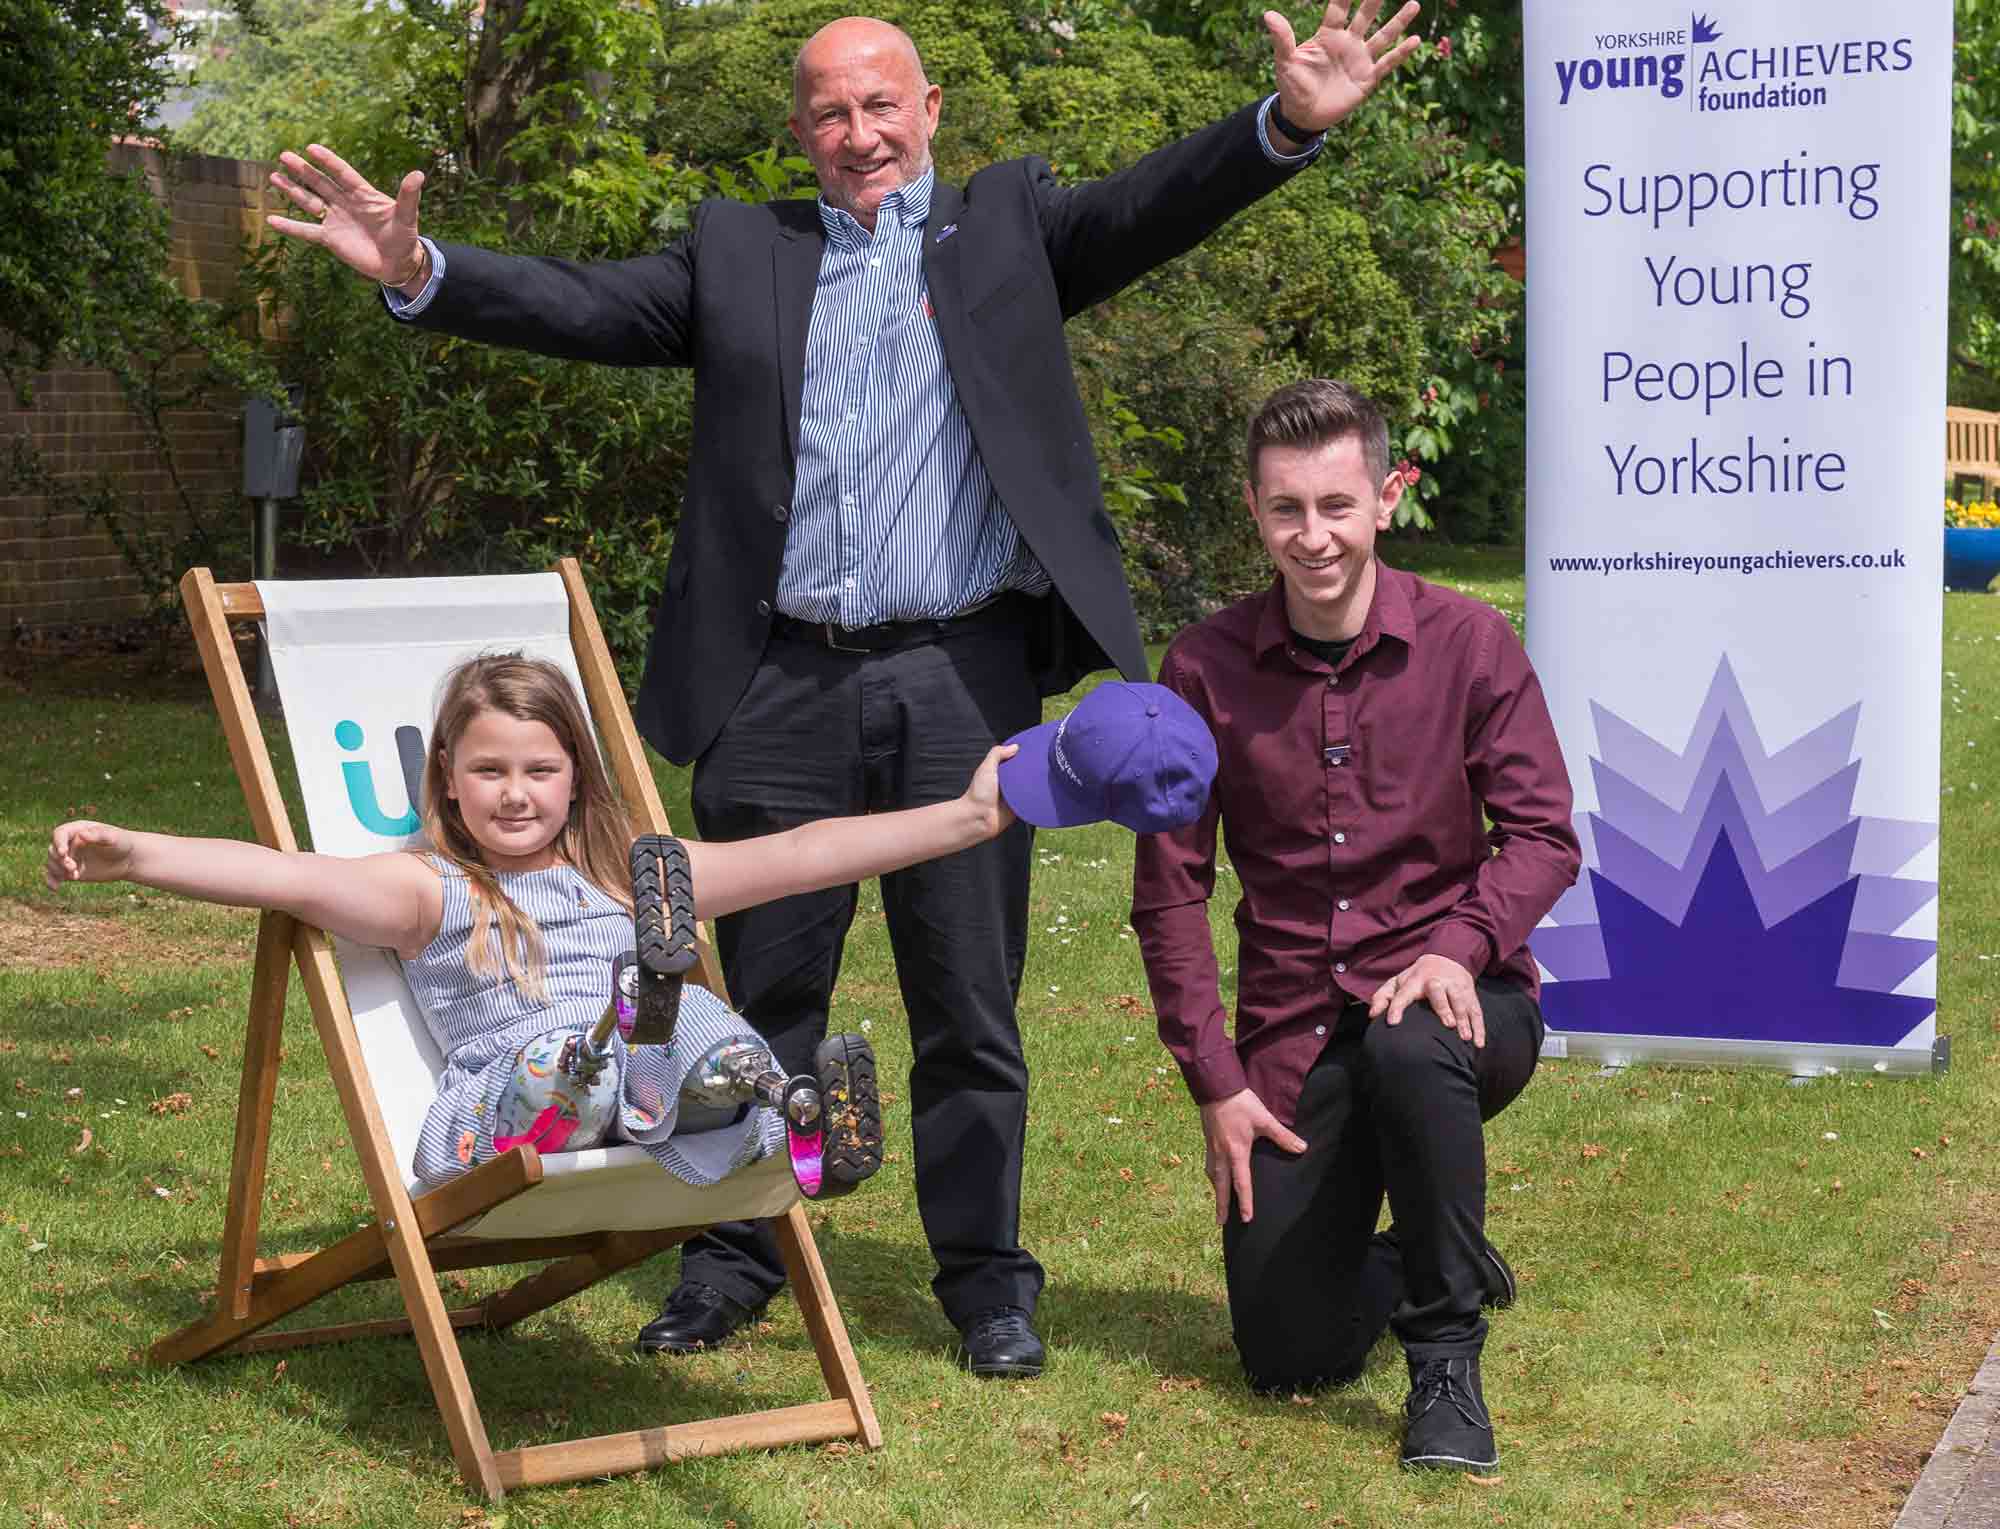 Launching the 2019 Awards are, from left, Maisie Catt, Yorkshire Young Achievers Foundation Vice Chairman Richard Stroud and Cameron Osburn